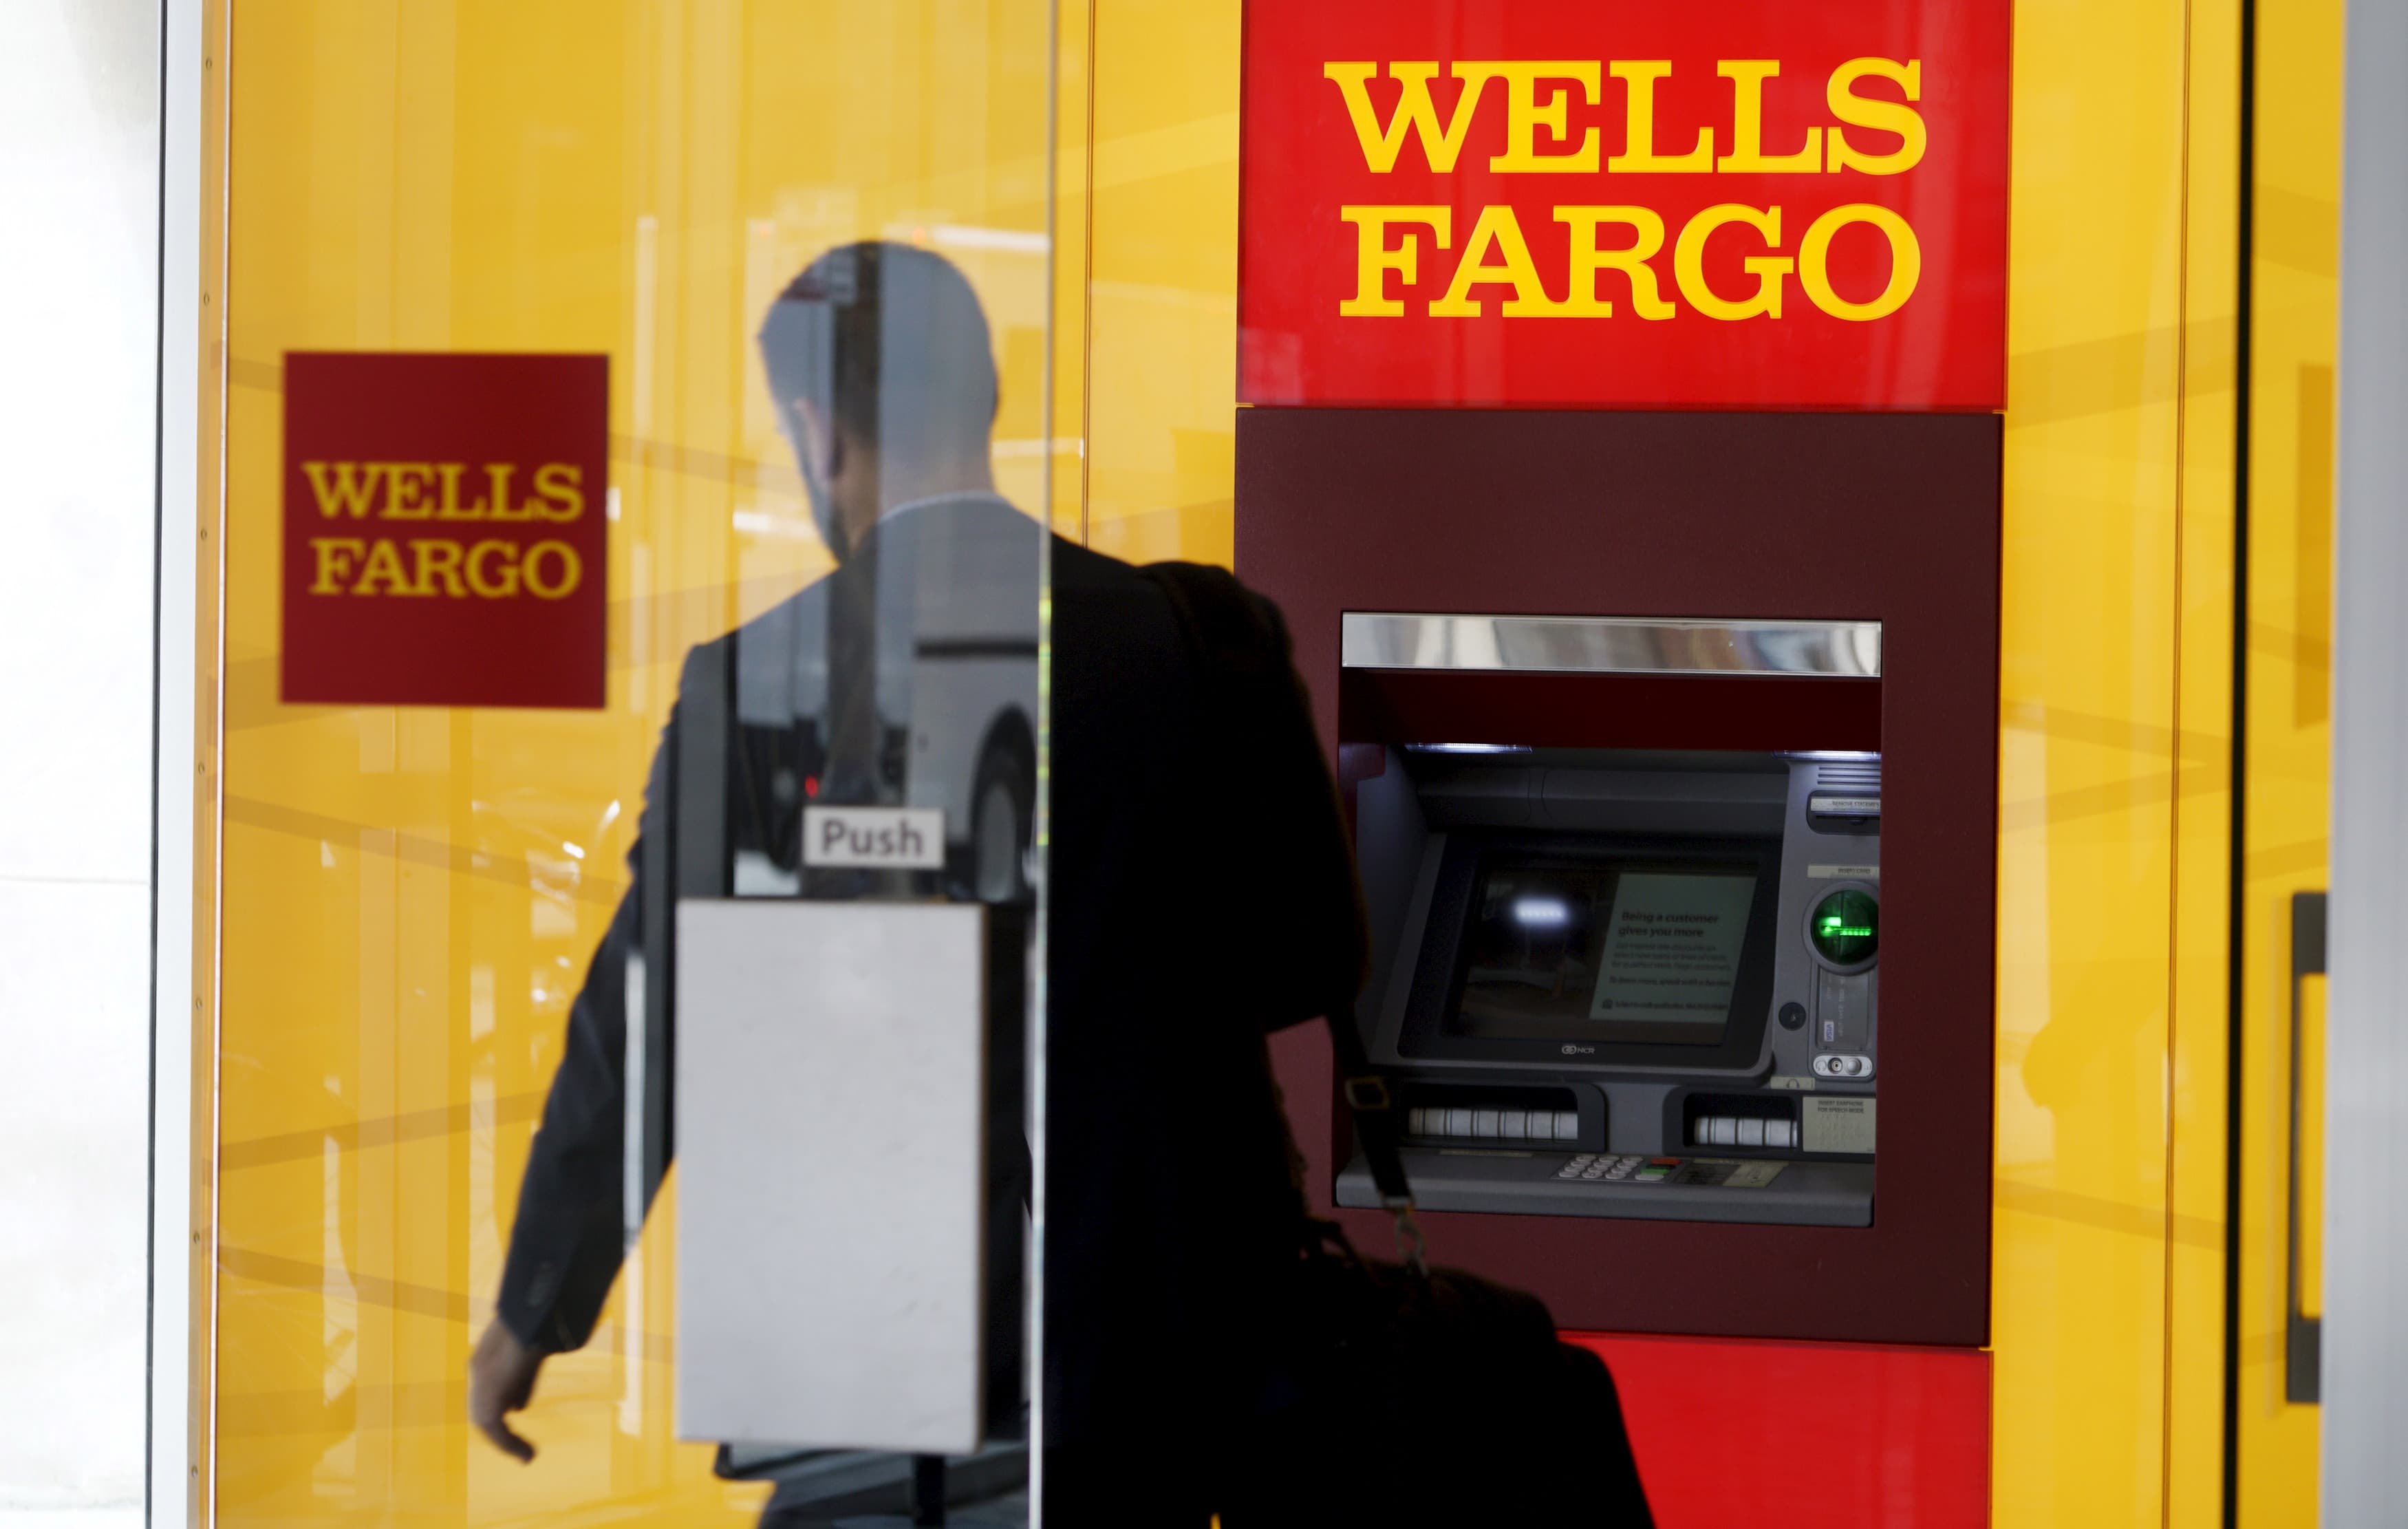 Wells Fargo has to pay $3.7 billion for past scandals.  That's why we see it positively